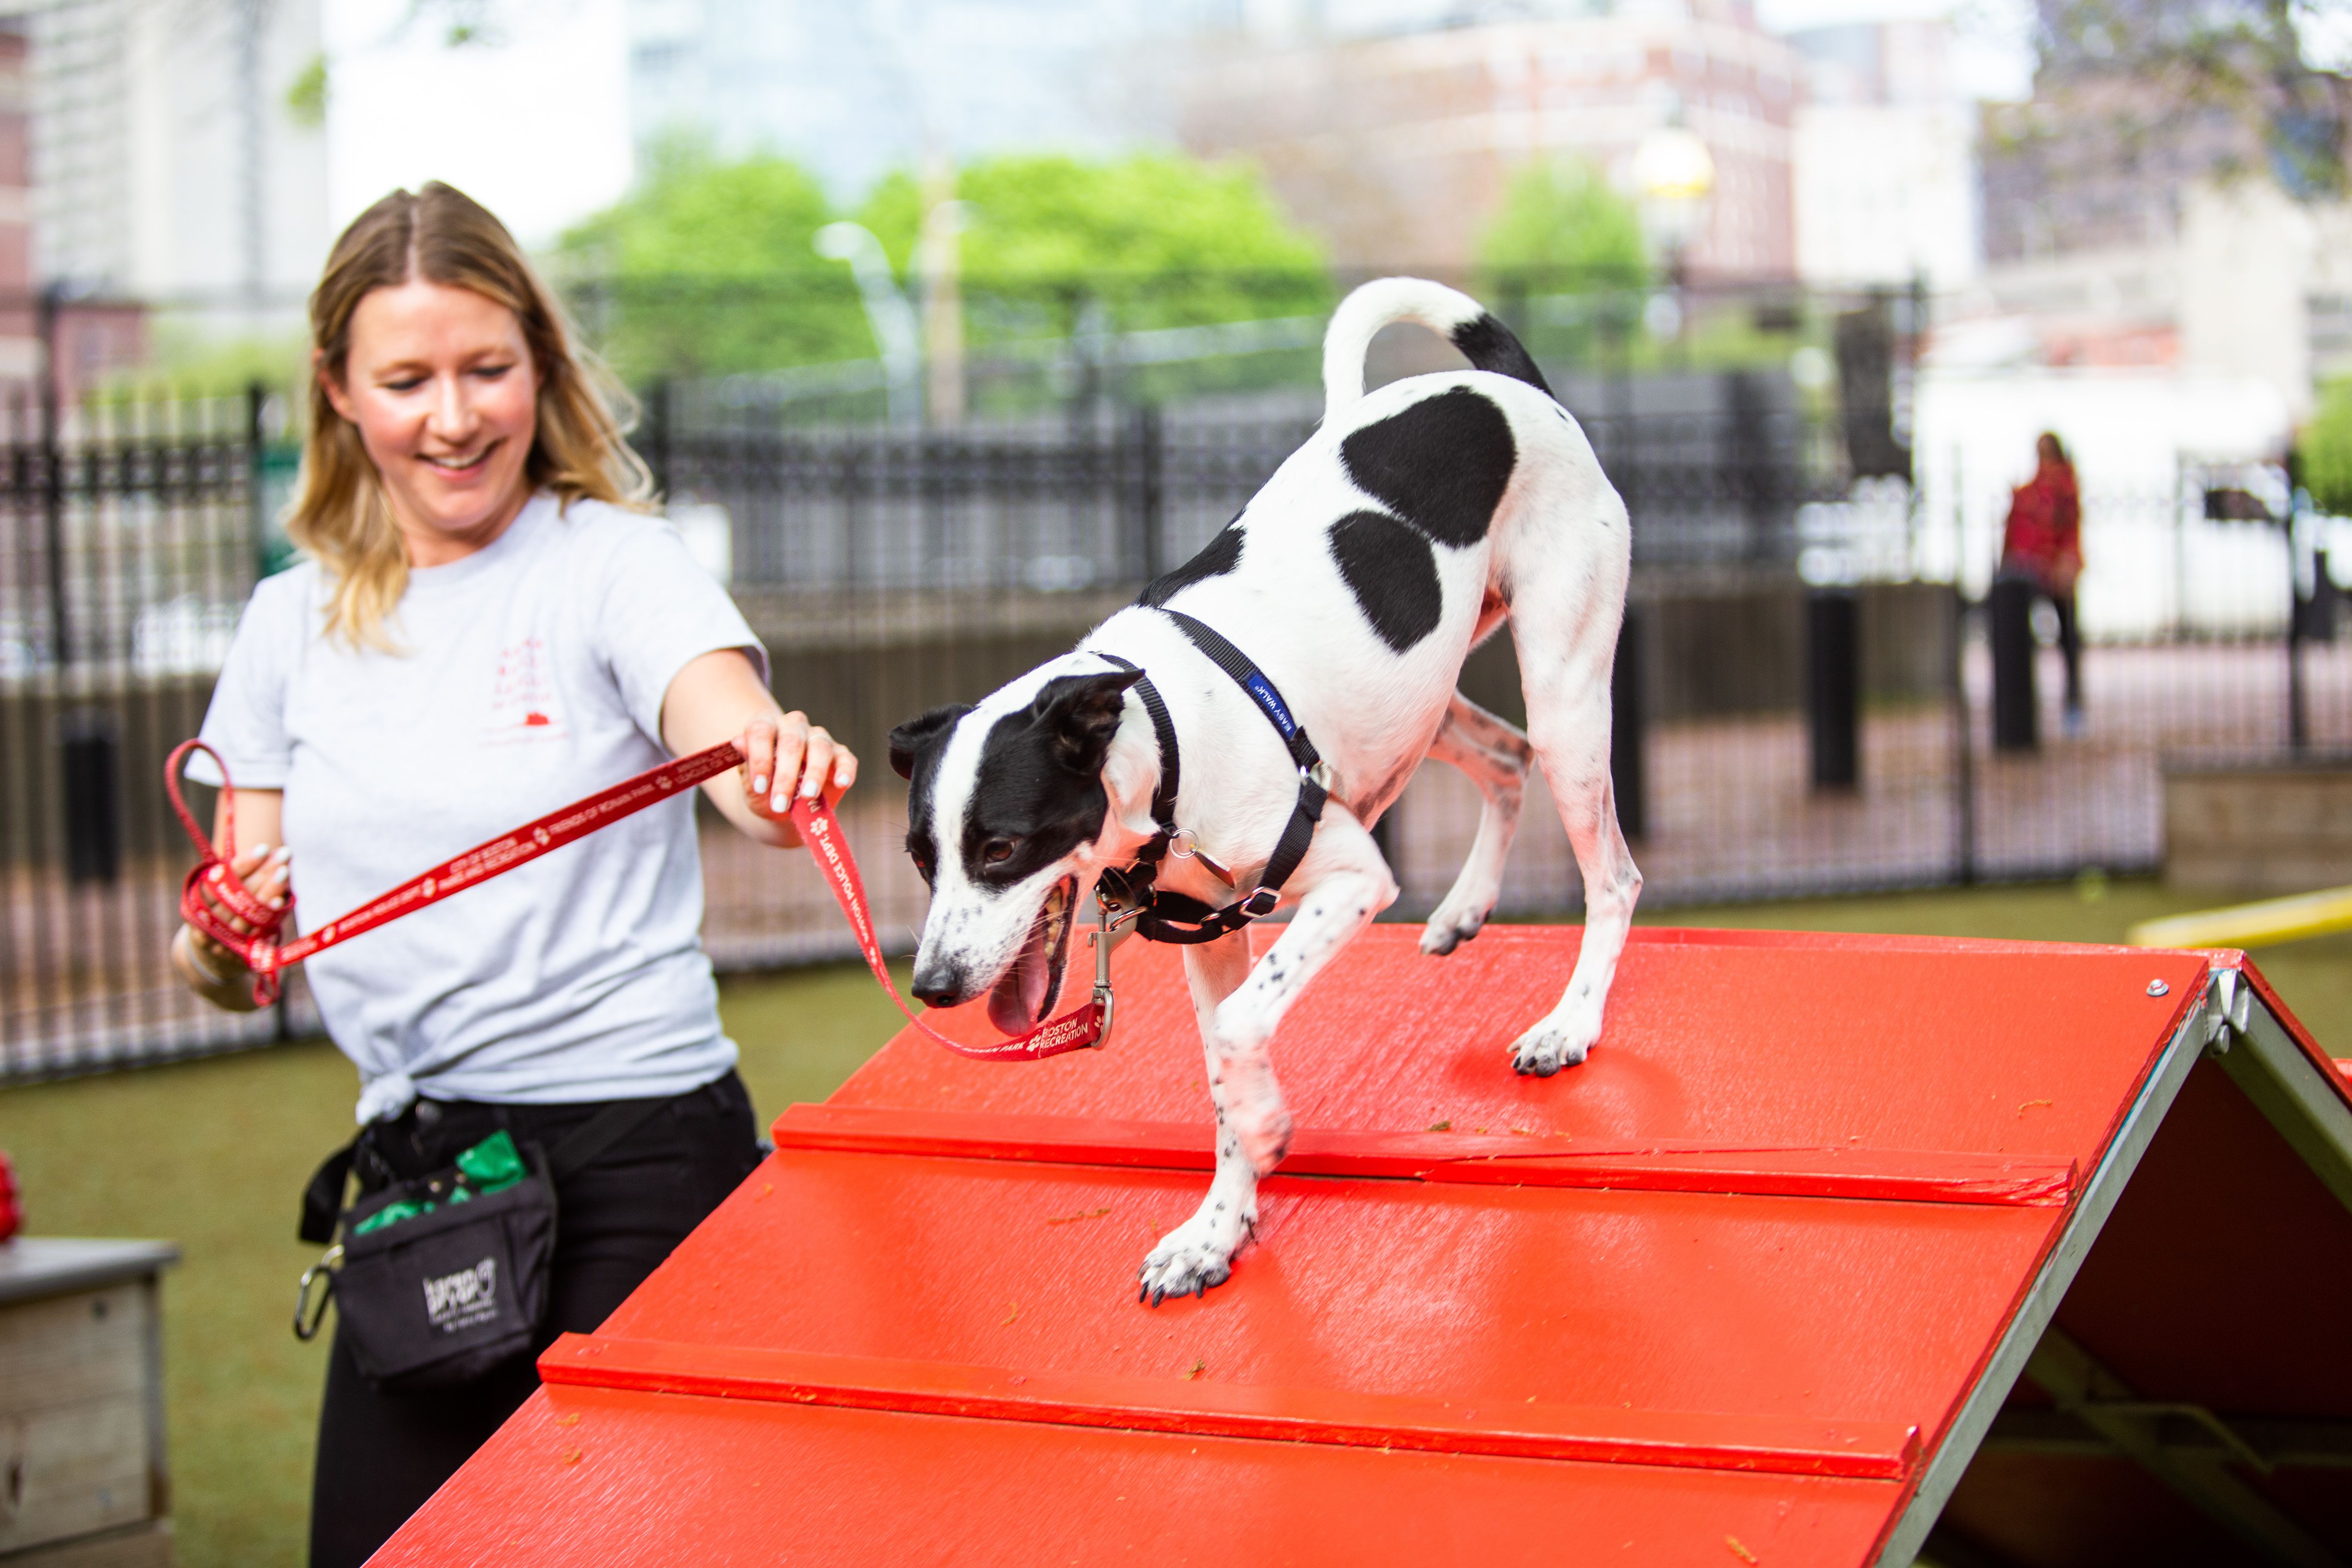 women guides a dog down a red ramp